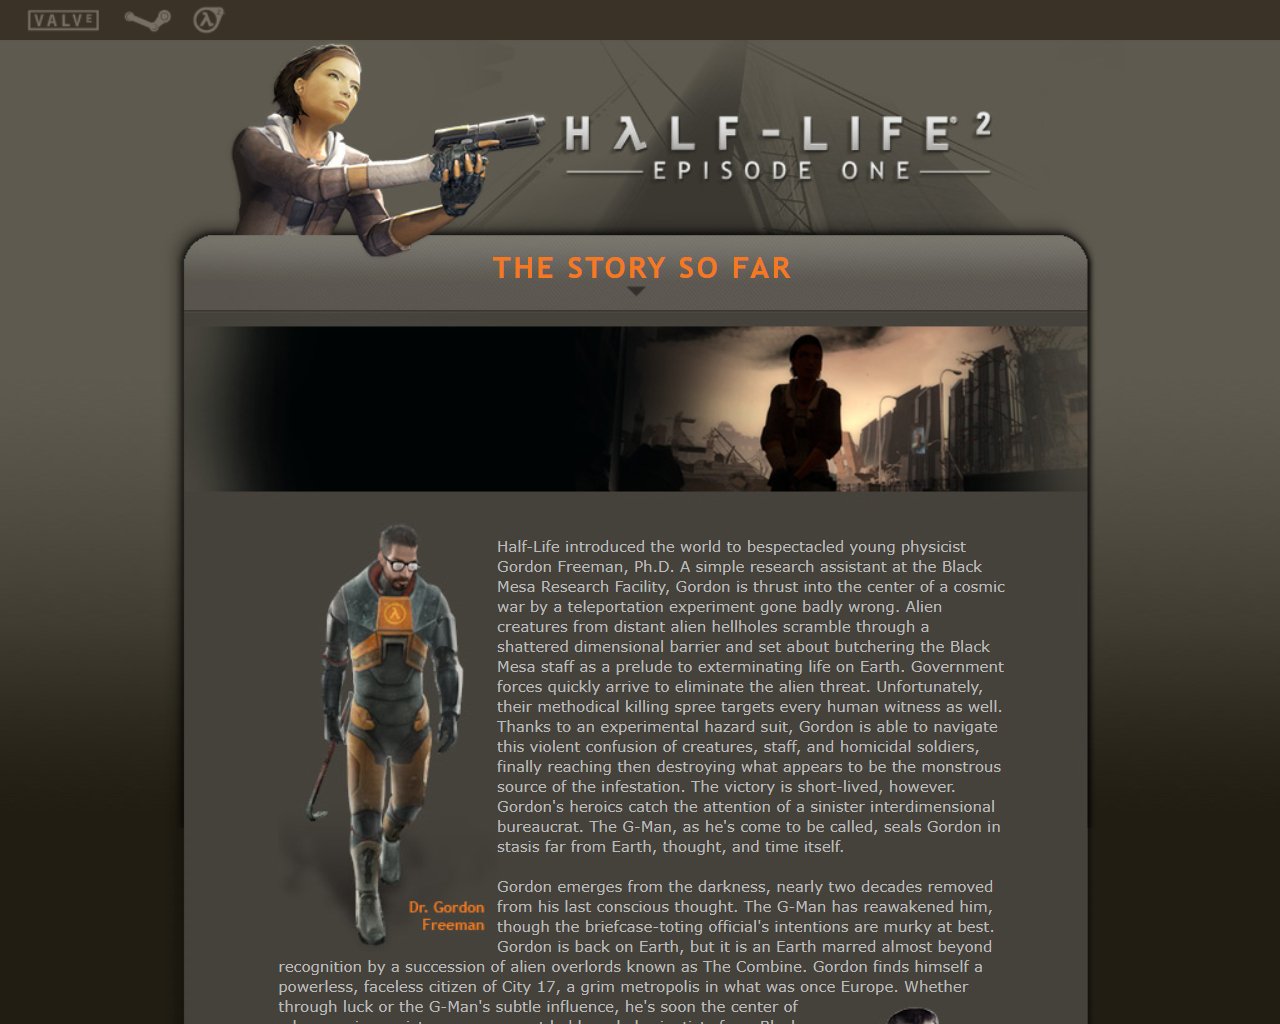 The Half-Life 2: Episode One website's story page, featuring a detailed overview of the story so far in the Half-Life series up to Half-Life 2: Episode One.